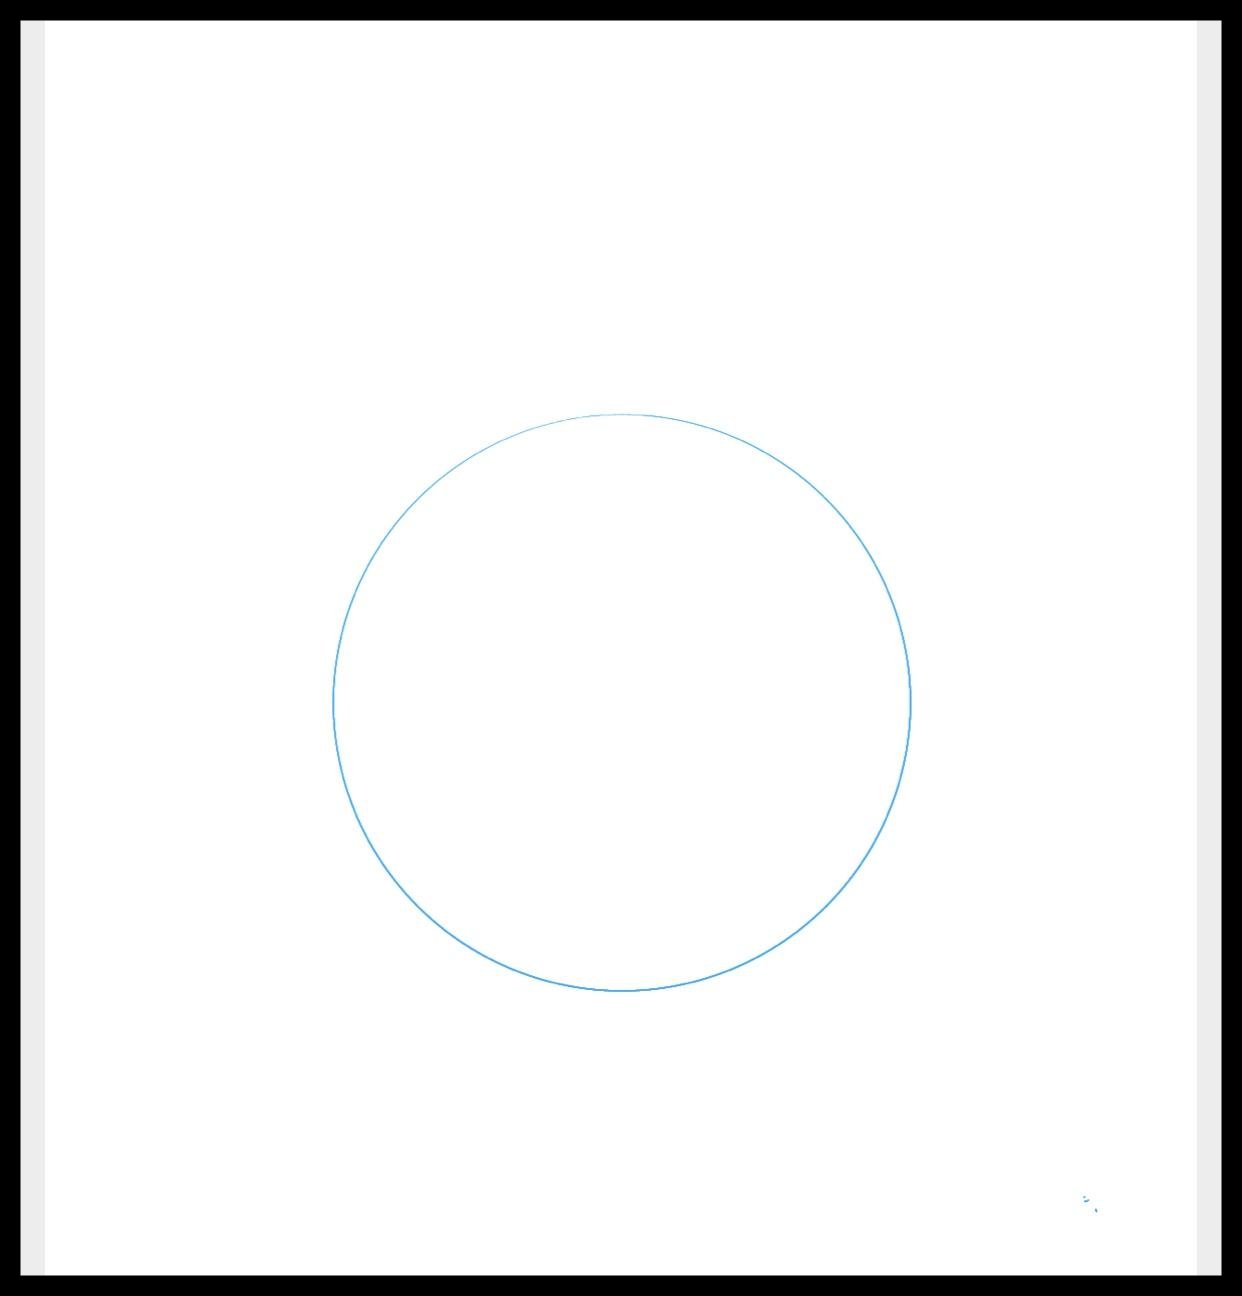 Step 1) Take a new white sheet and draw a circle in the middle of the sheet